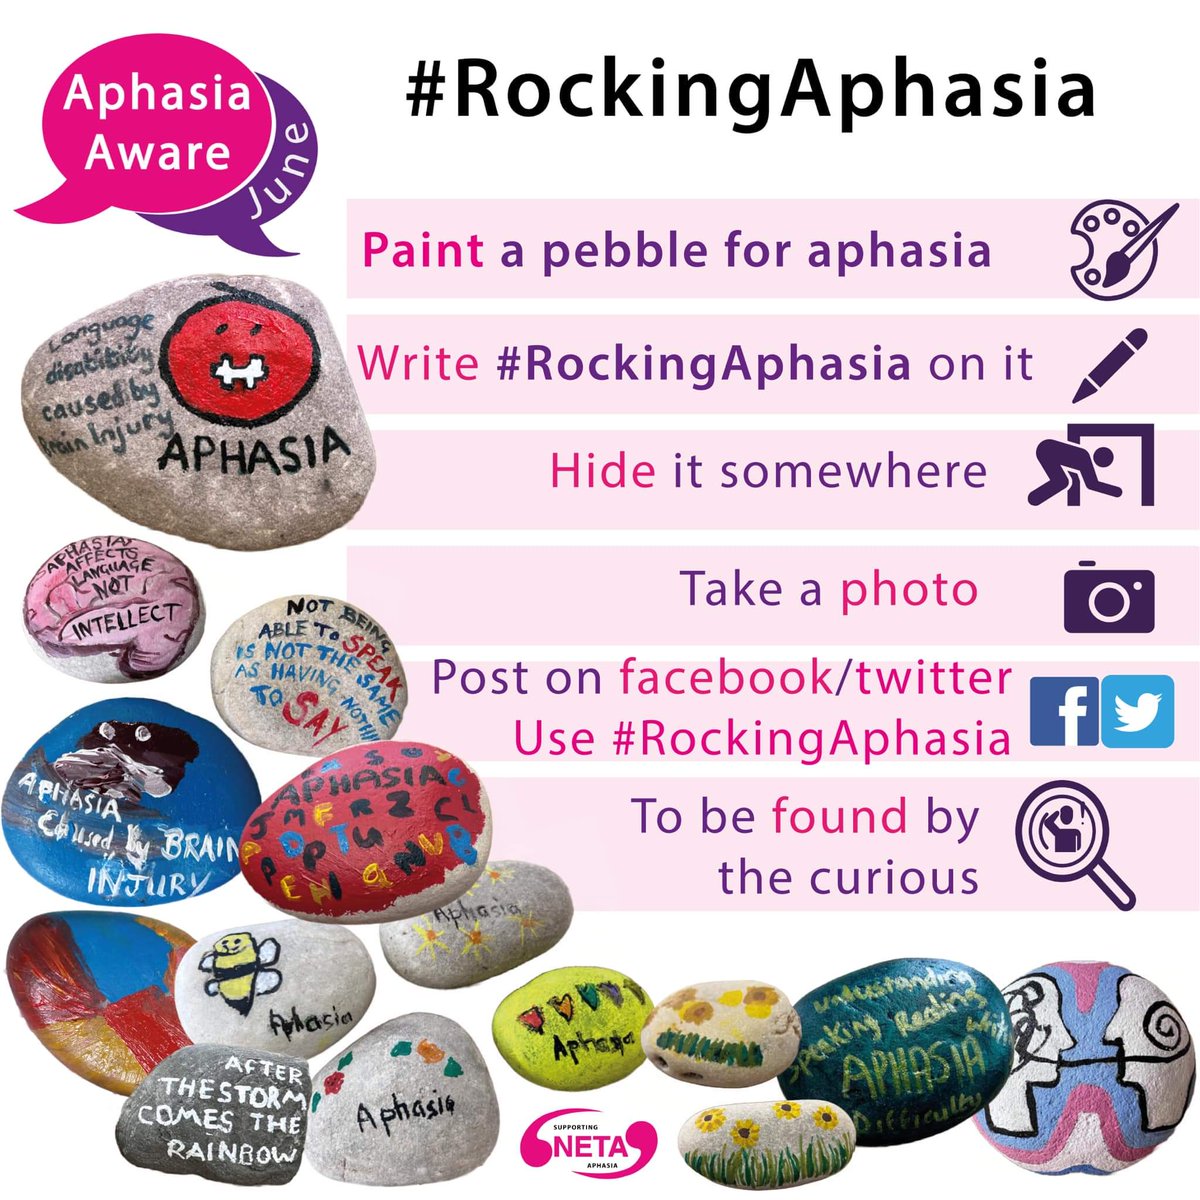 A shout out to #ASSETS2022 community and all my fellow #aphasia #a11y researchers. Will you join us this month in #RockingAphasia? @am_piper @Dr_Gennaro_Imp @Tom_Langford_ @AineKearnsSLT @shaunkane @jmcgrenere @faustina_hwang @ACM_CEO @RoisinMcNaney #AphasiaAwarenessMonth